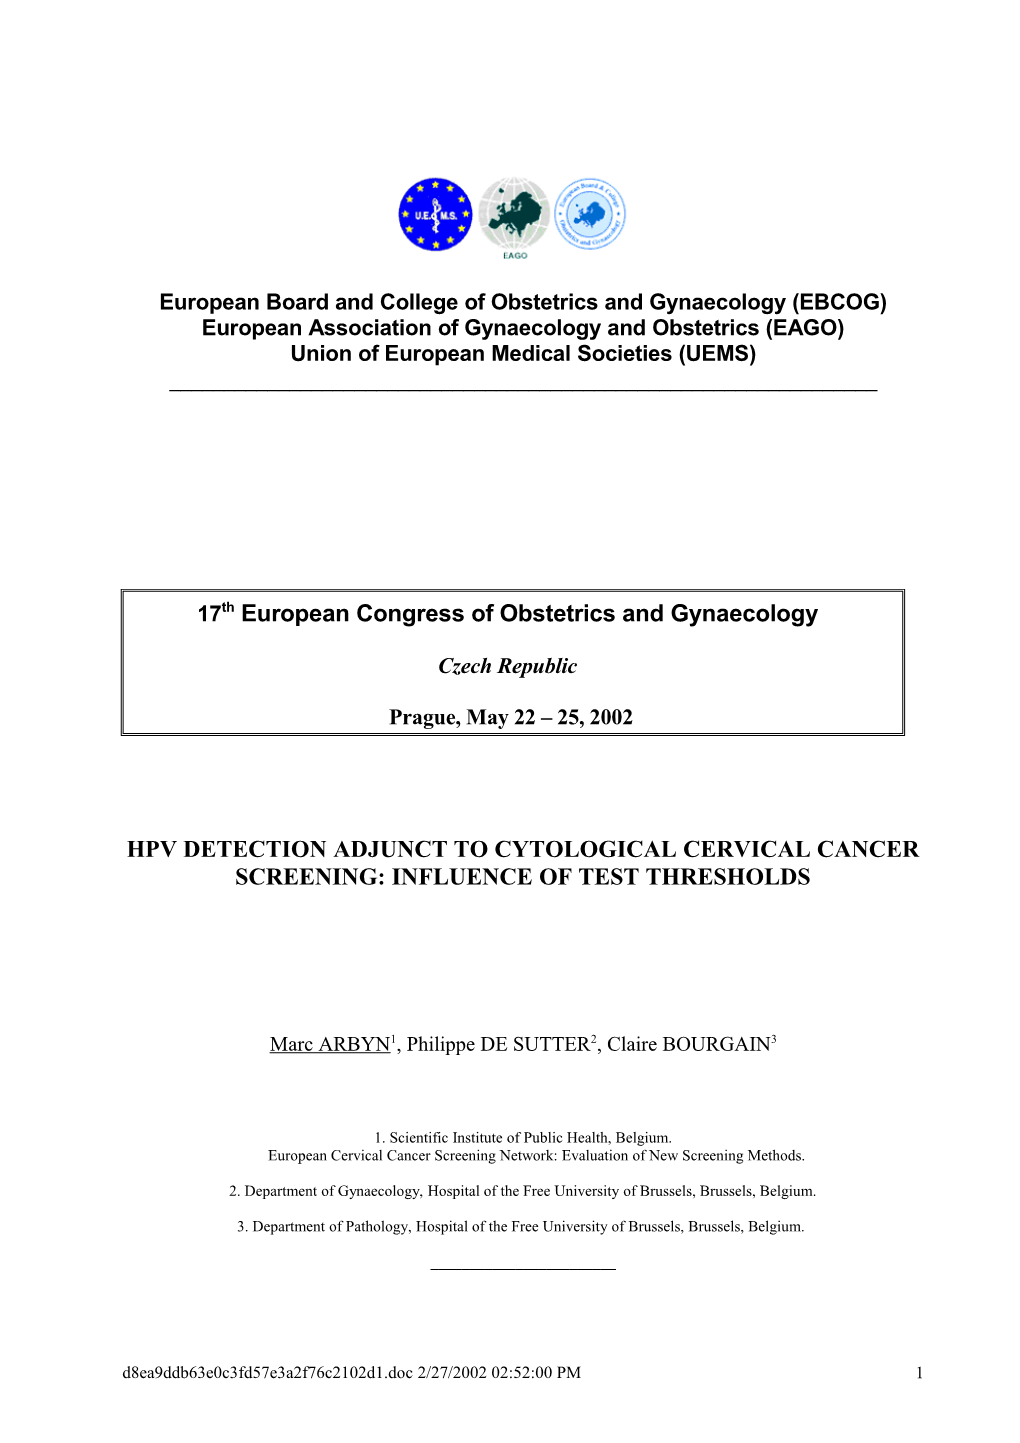 European Board and College of Obstetrics and Gynaecology (EBCOG)